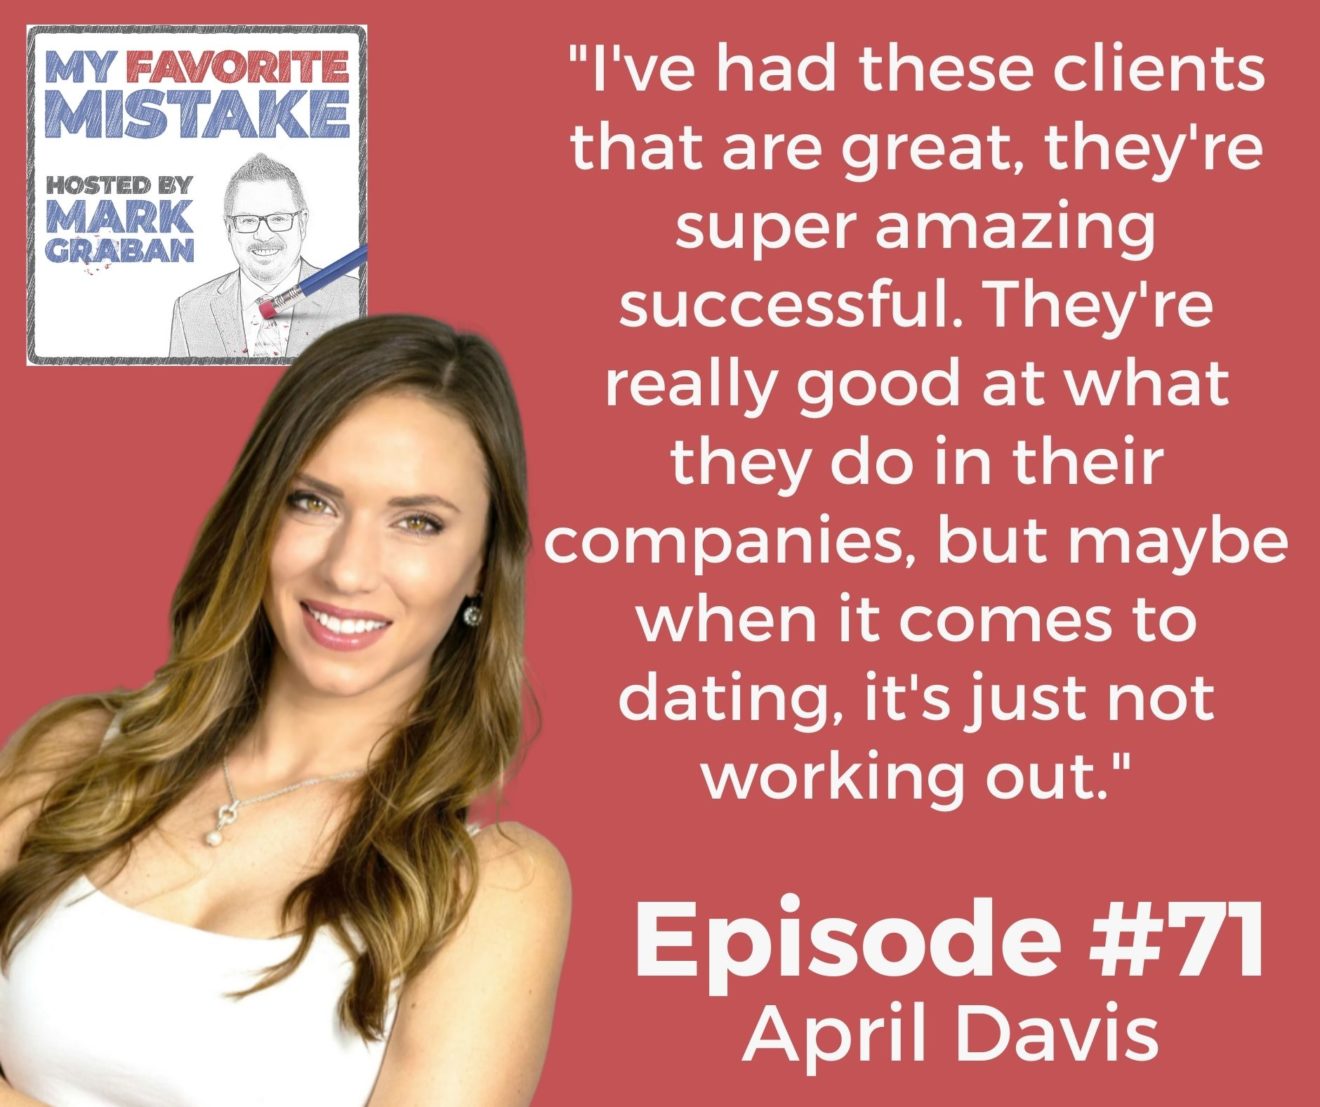 "I've had these clients that are great, they're super amazing successful. They're really good at what they do in their companies, but maybe when it comes to dating, it's just not working out."